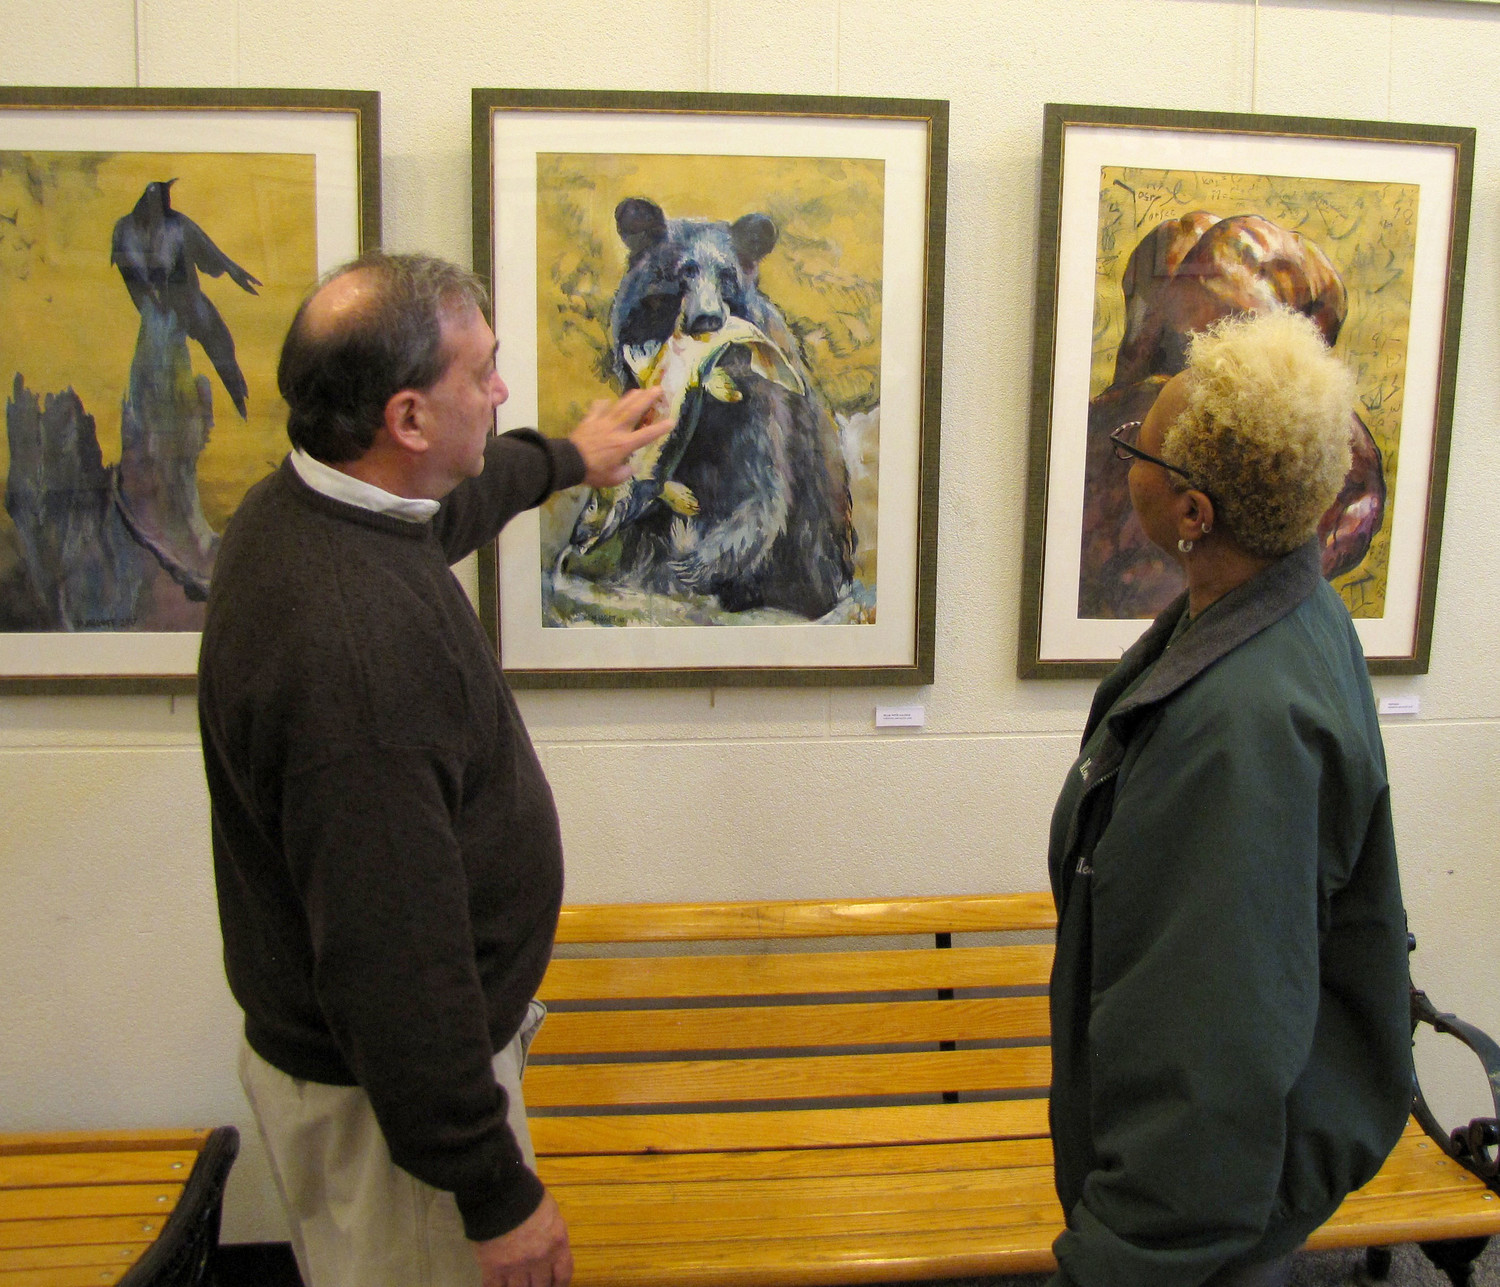 Marc Josloff, left, talked about his paintings with Freeporter, Peggy Bickett at the Freeport Memorial Library on Jan. 8.